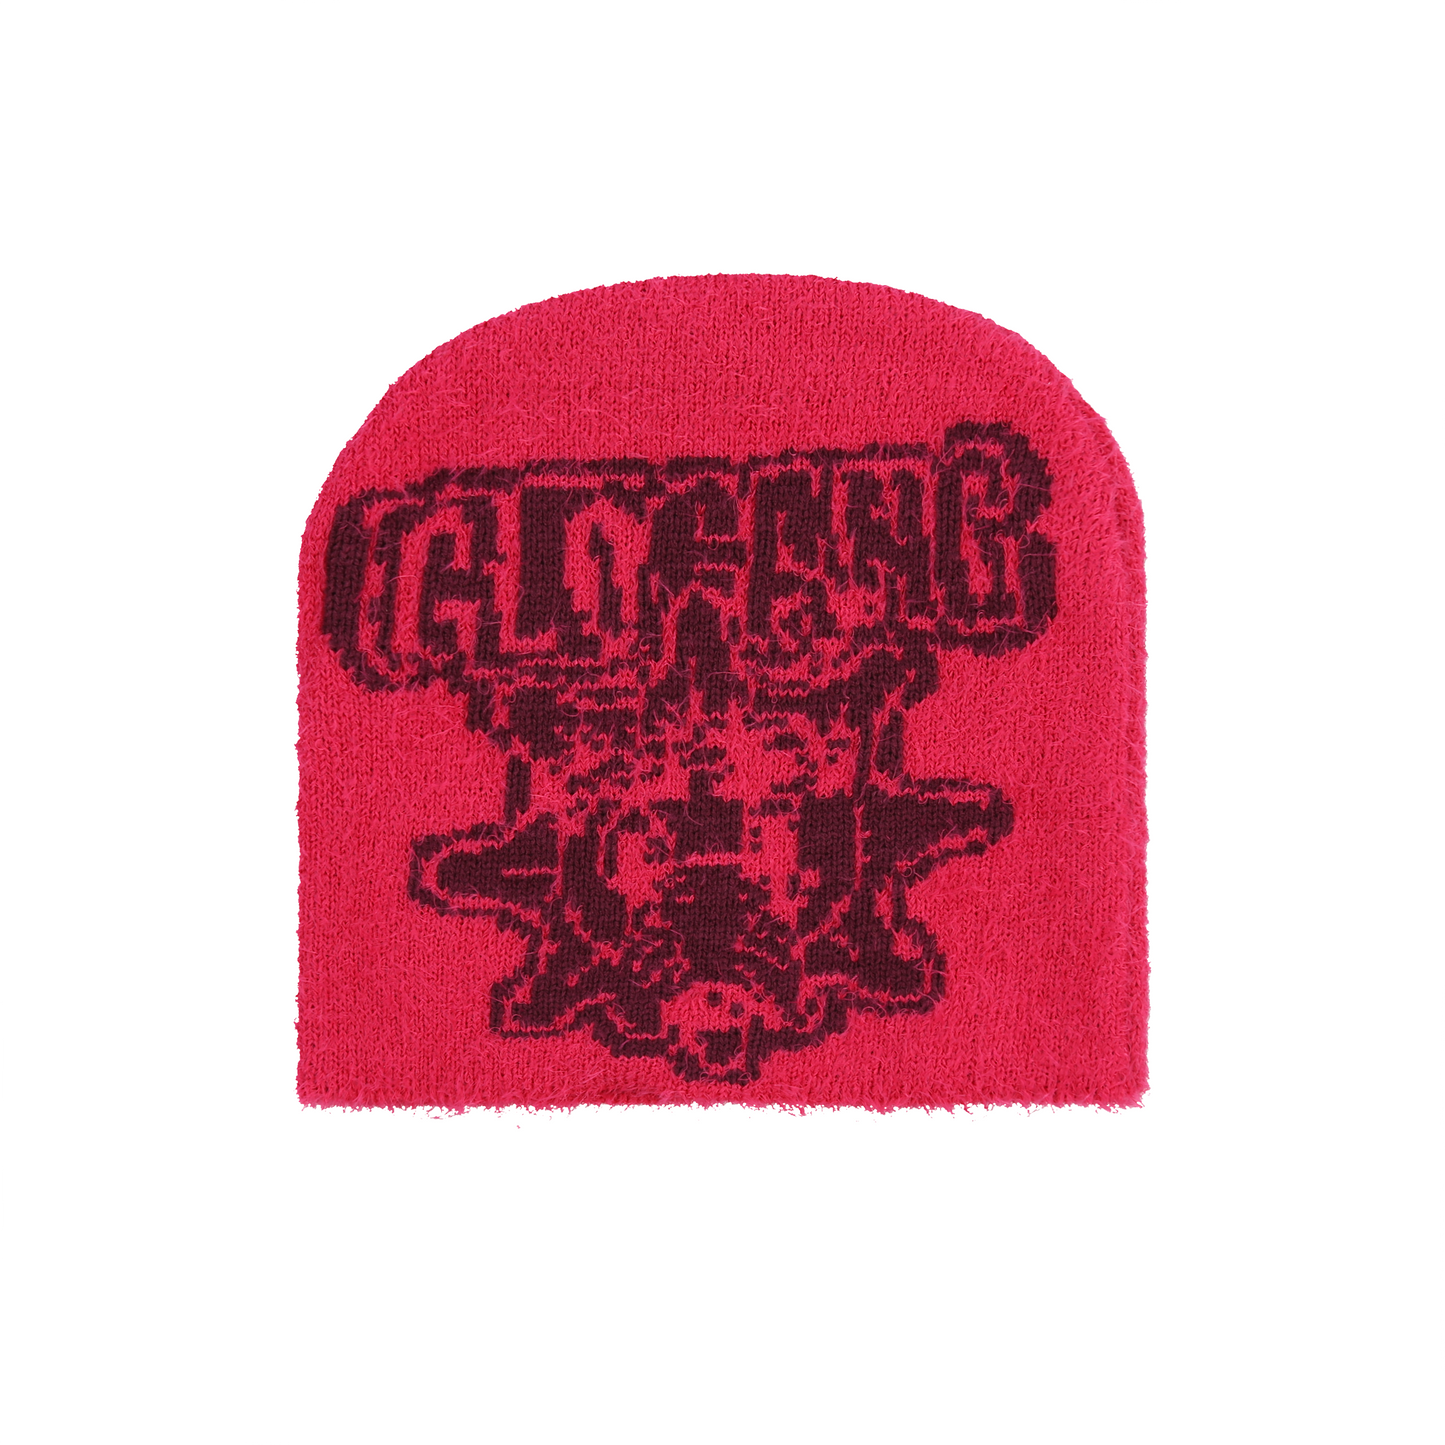 Almighty Beanie (Red/Burgandy)